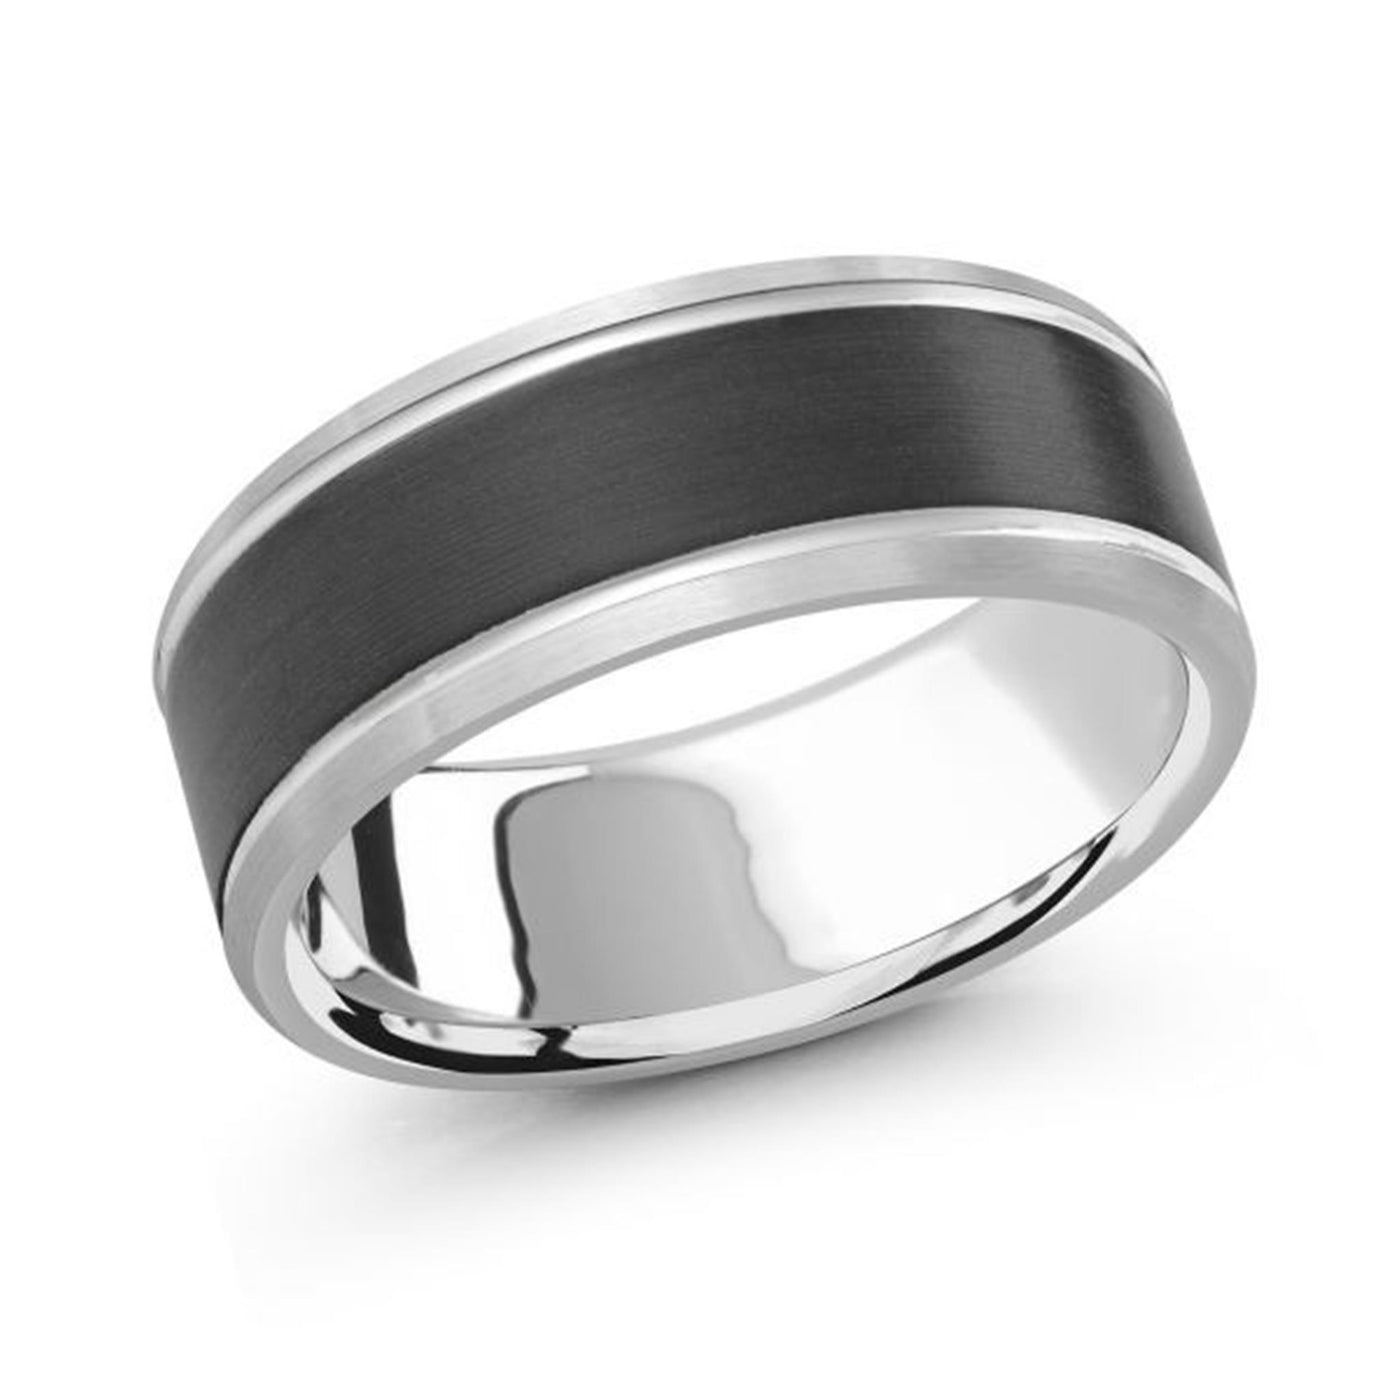 Malo 8mm Carbon Fiber and 14K White Gold Wedding Band